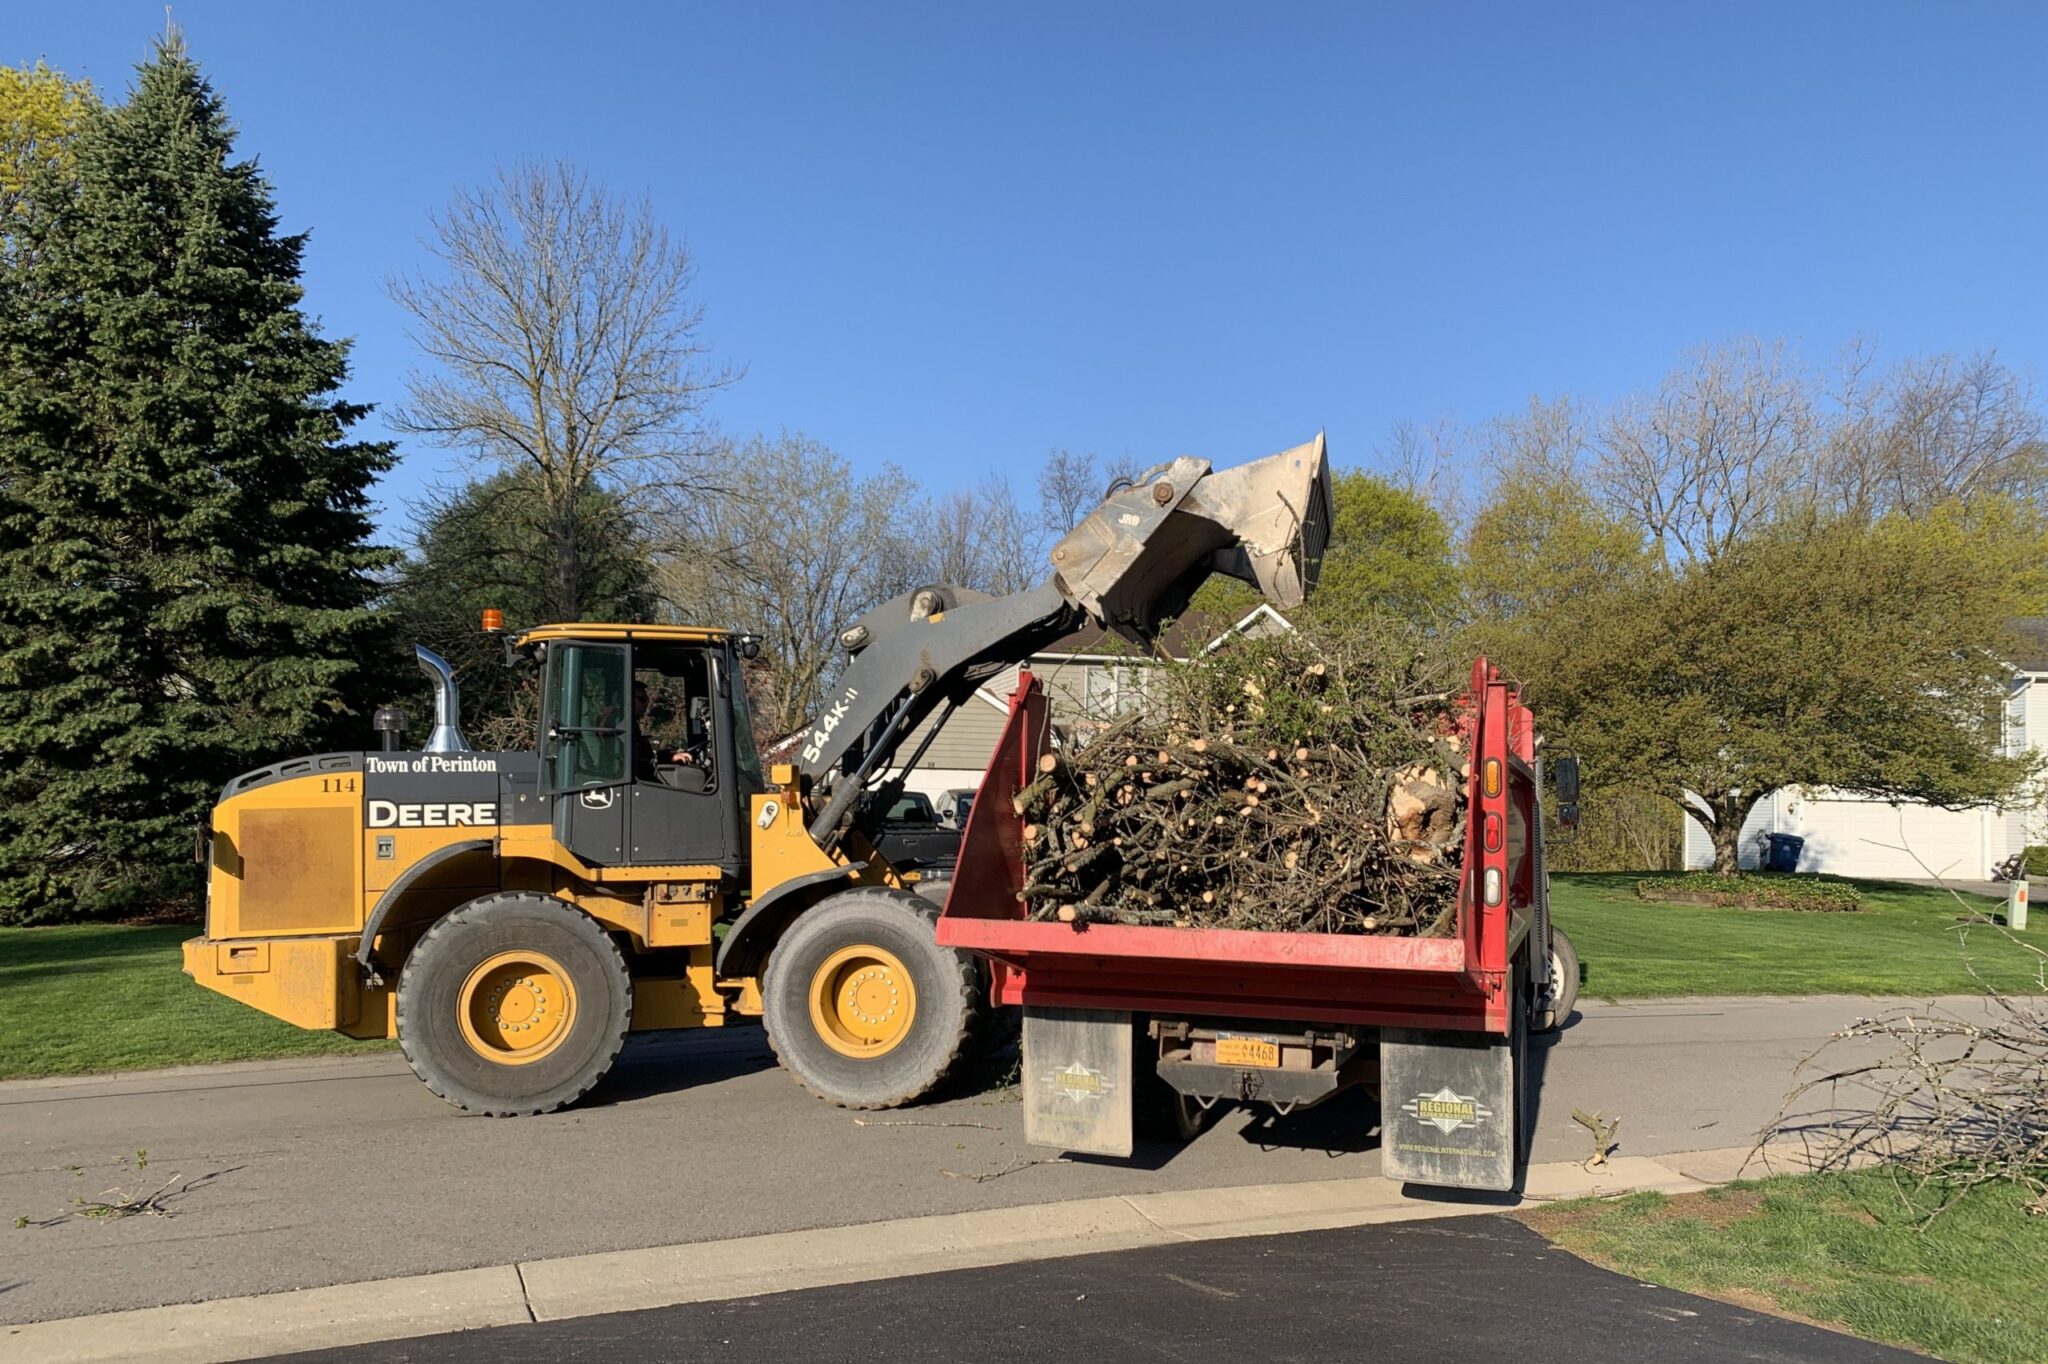 Residential Refuse Collection Update: Extended Collection Schedule